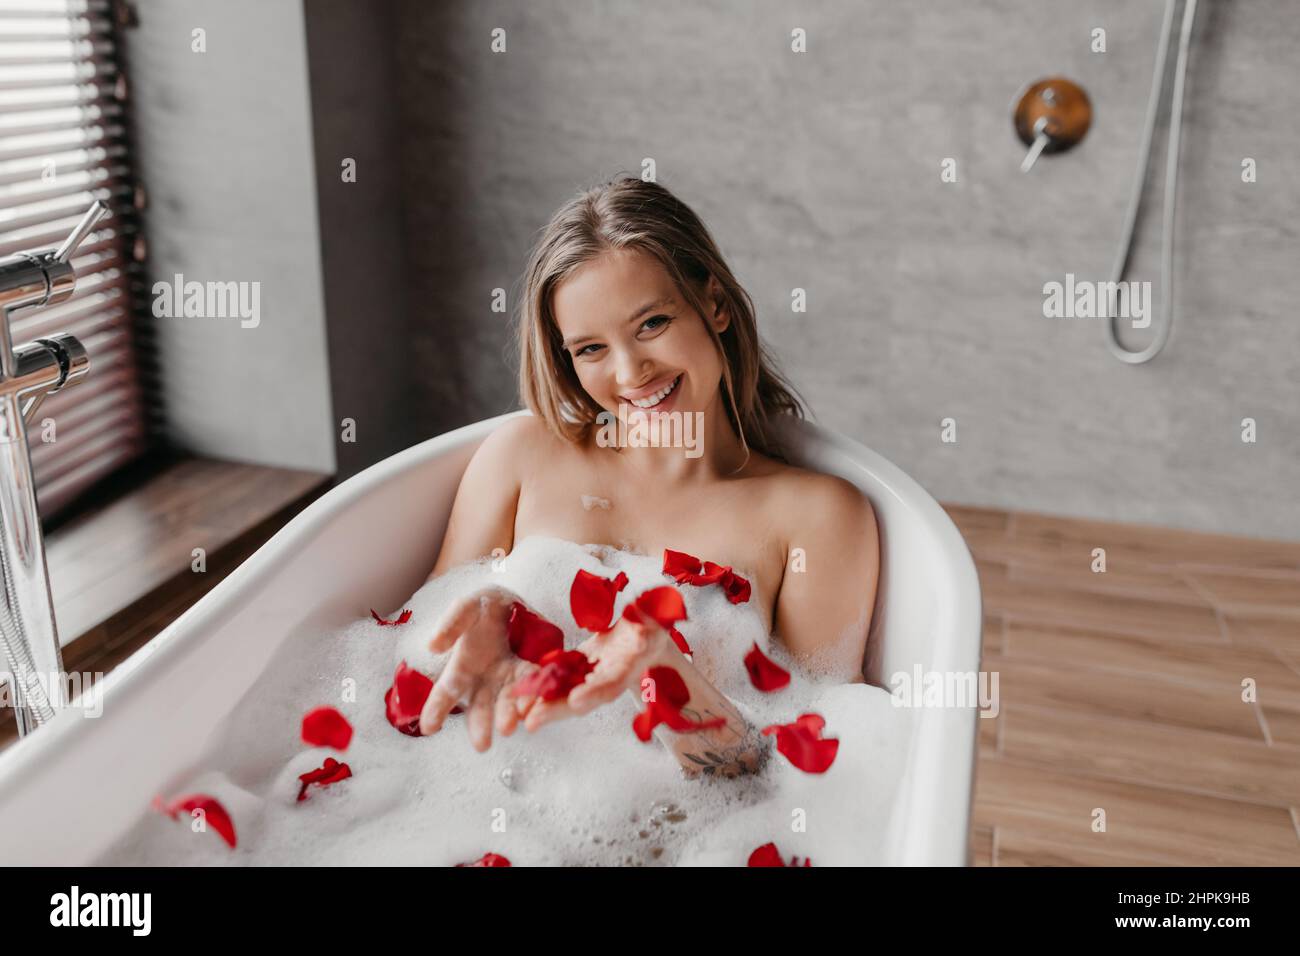 Spa treatments at home. Happy young caucasian lady relaxing in bathtub with foam and petals, smiling at camera Stock Photo